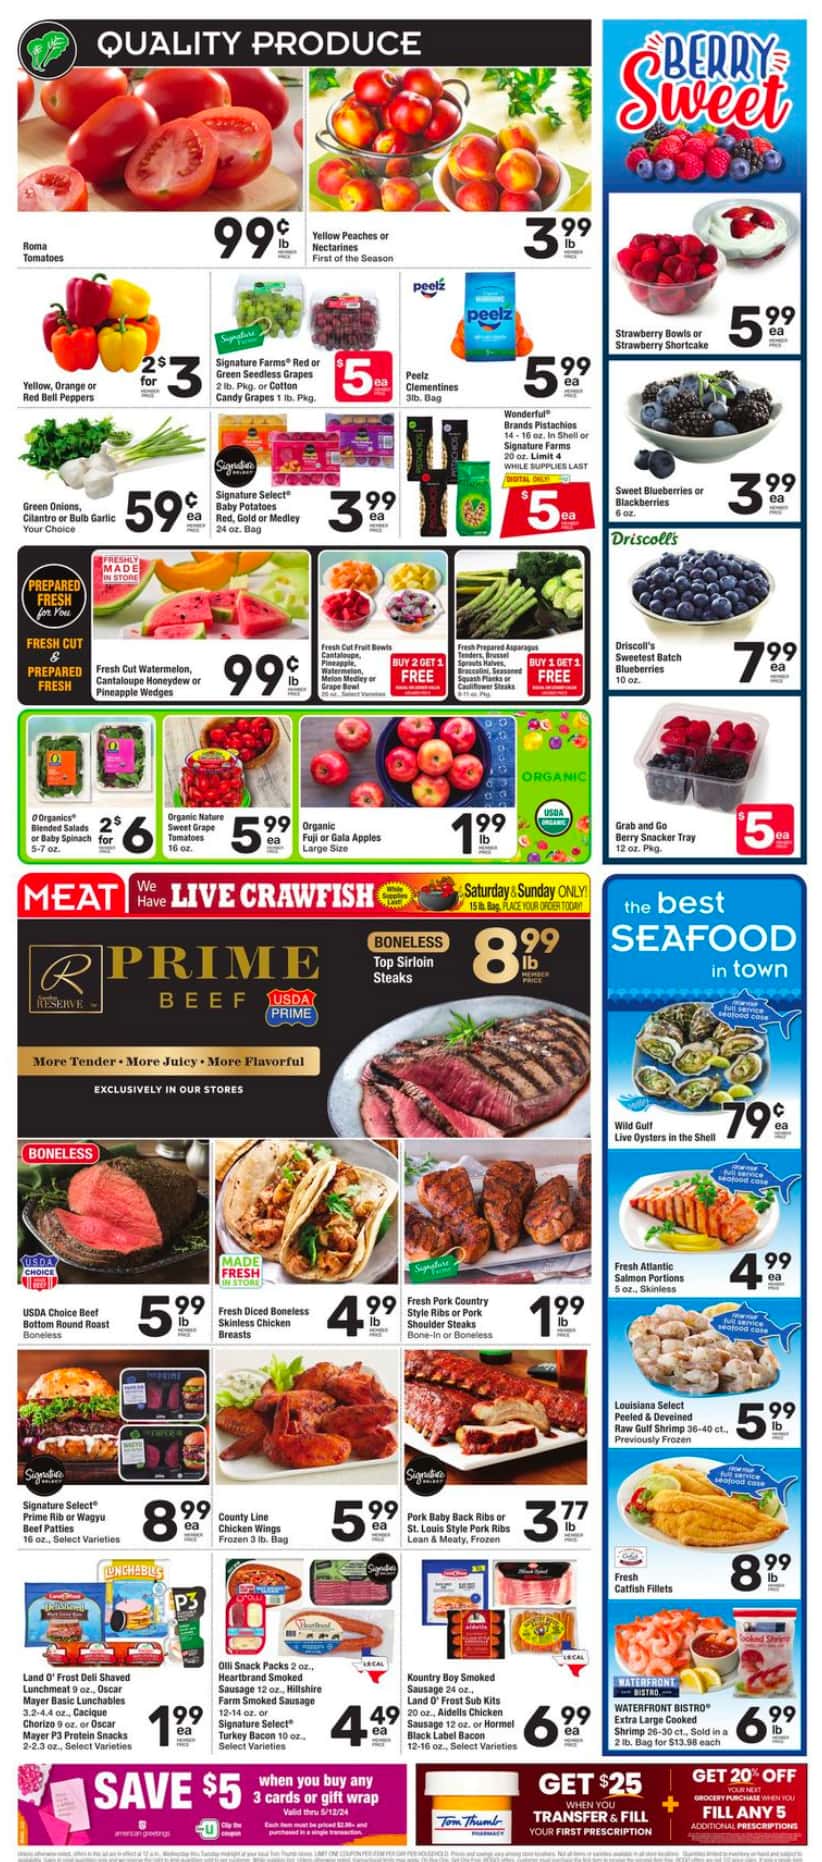 TomThumb_weekly_ad_042424_04